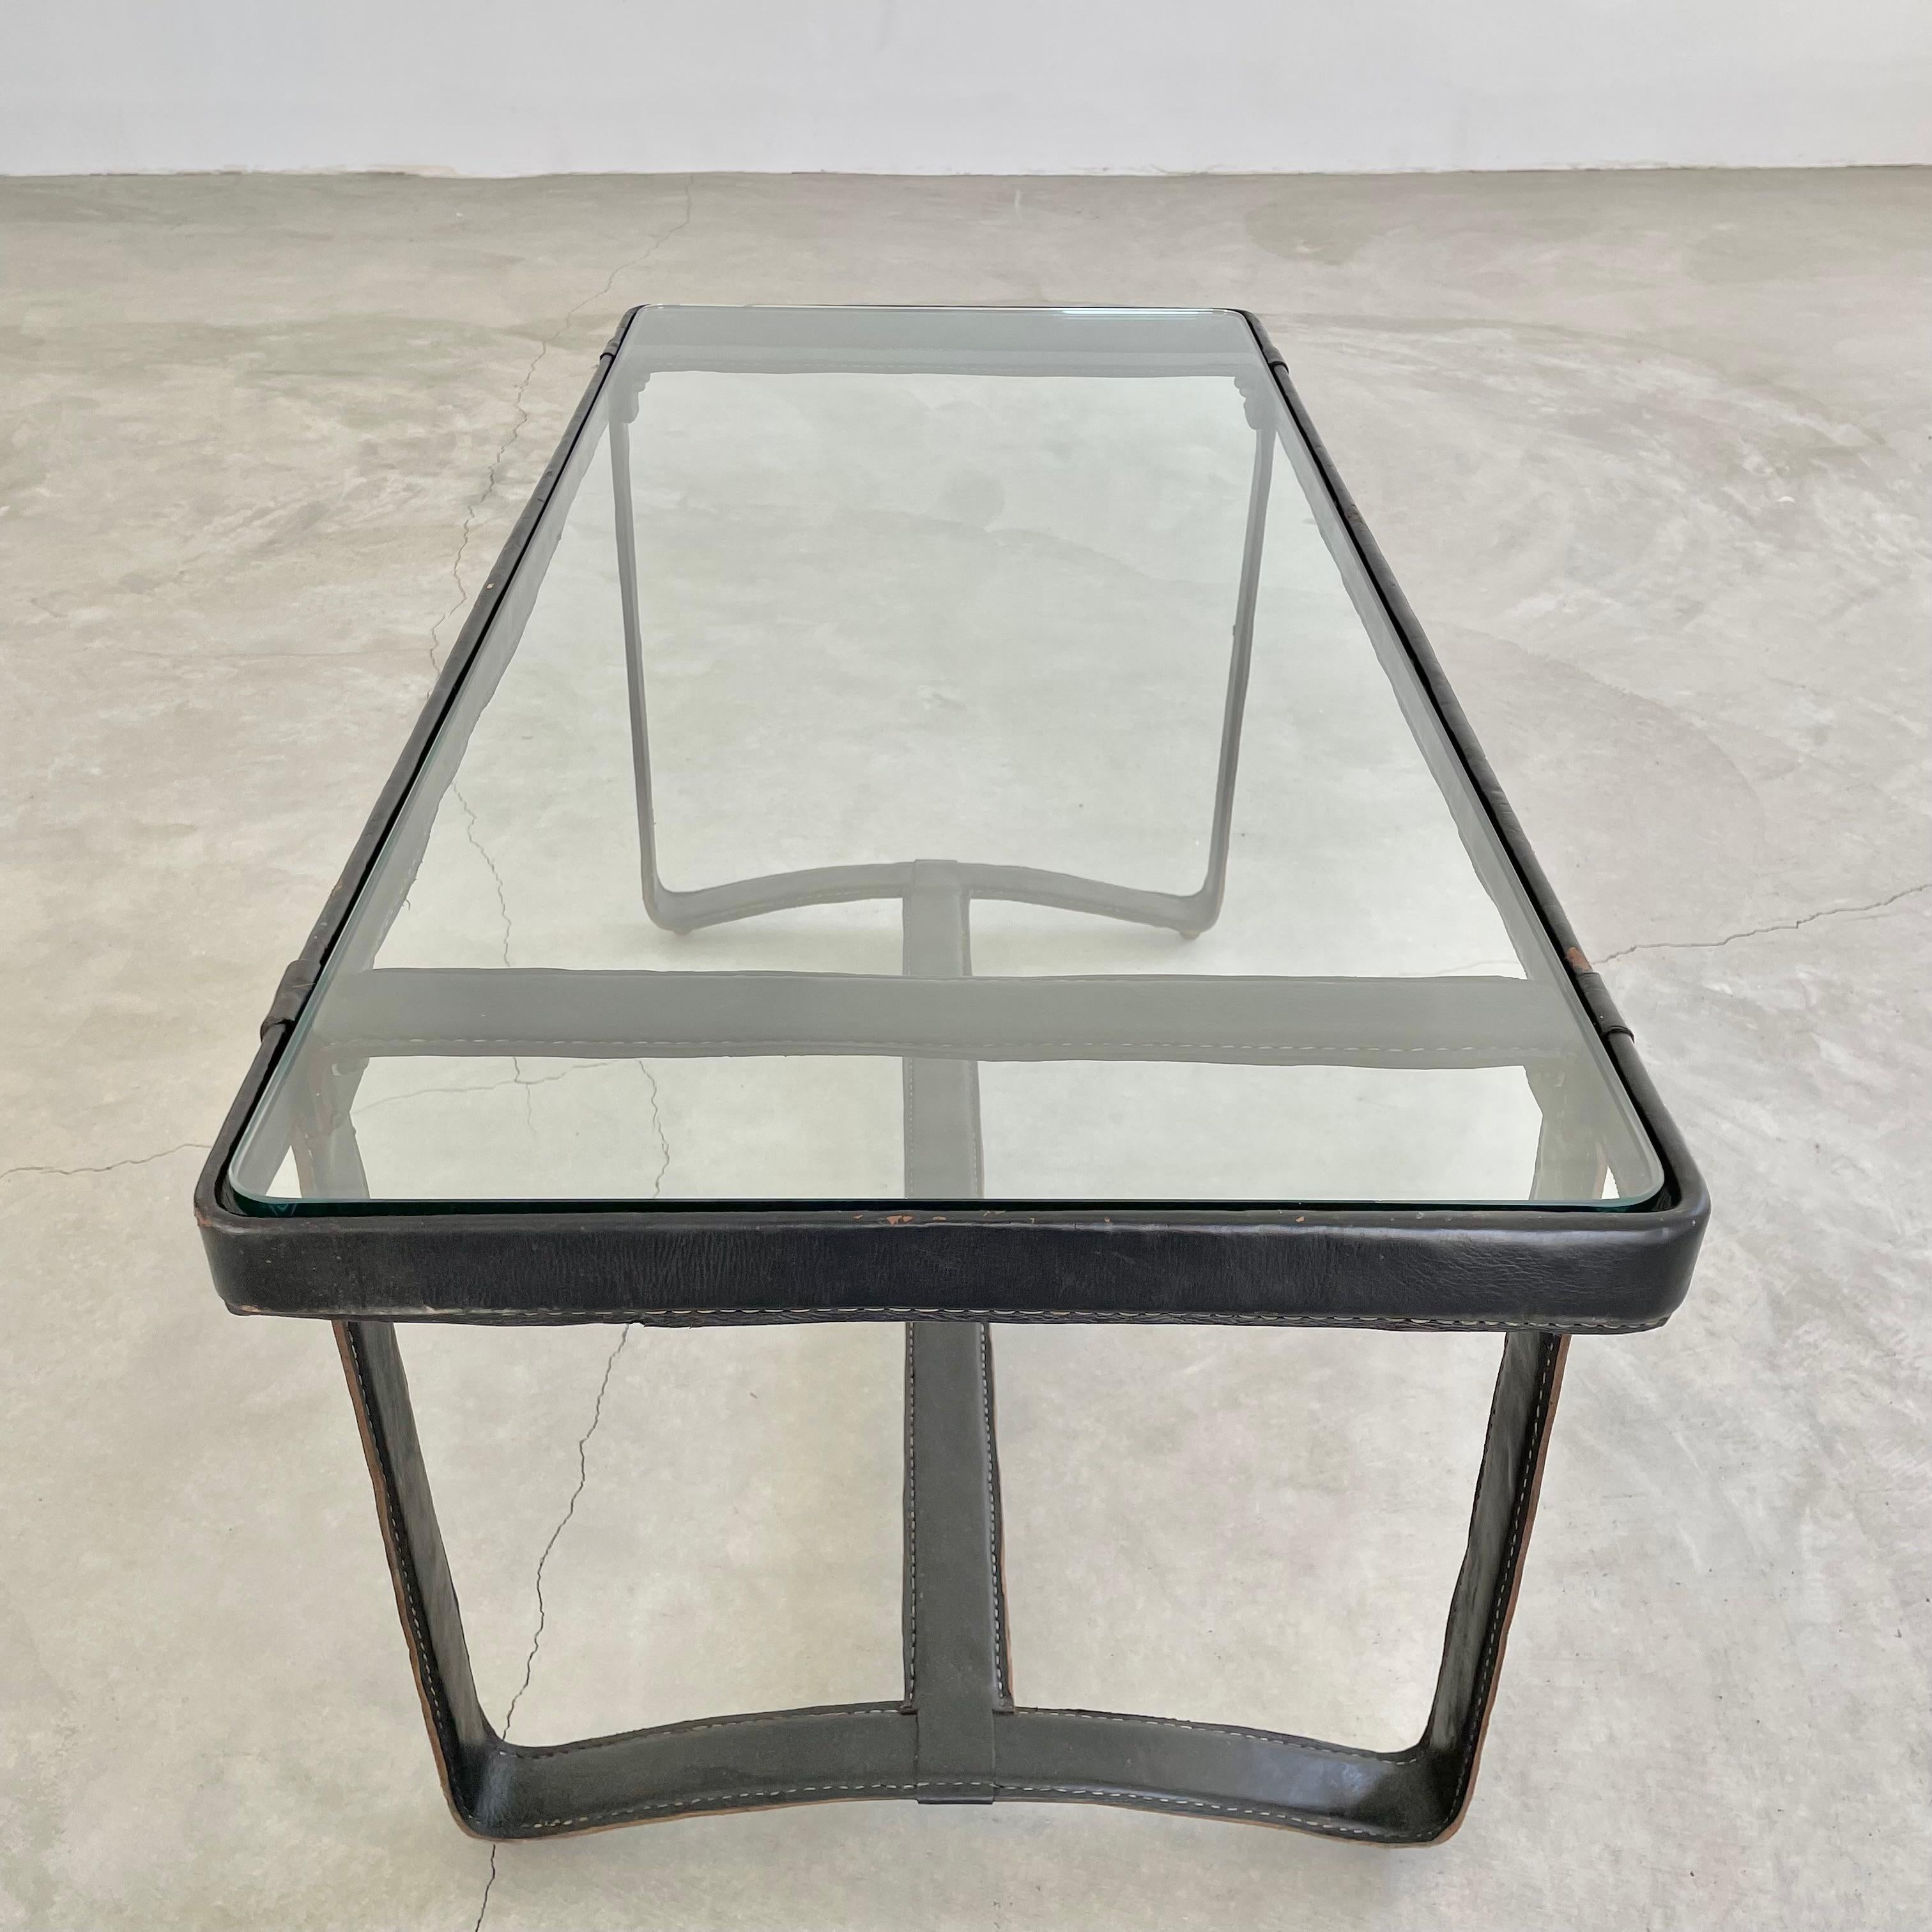 Jacques Adnet Leather Coffee Table, 1950s For Sale 3